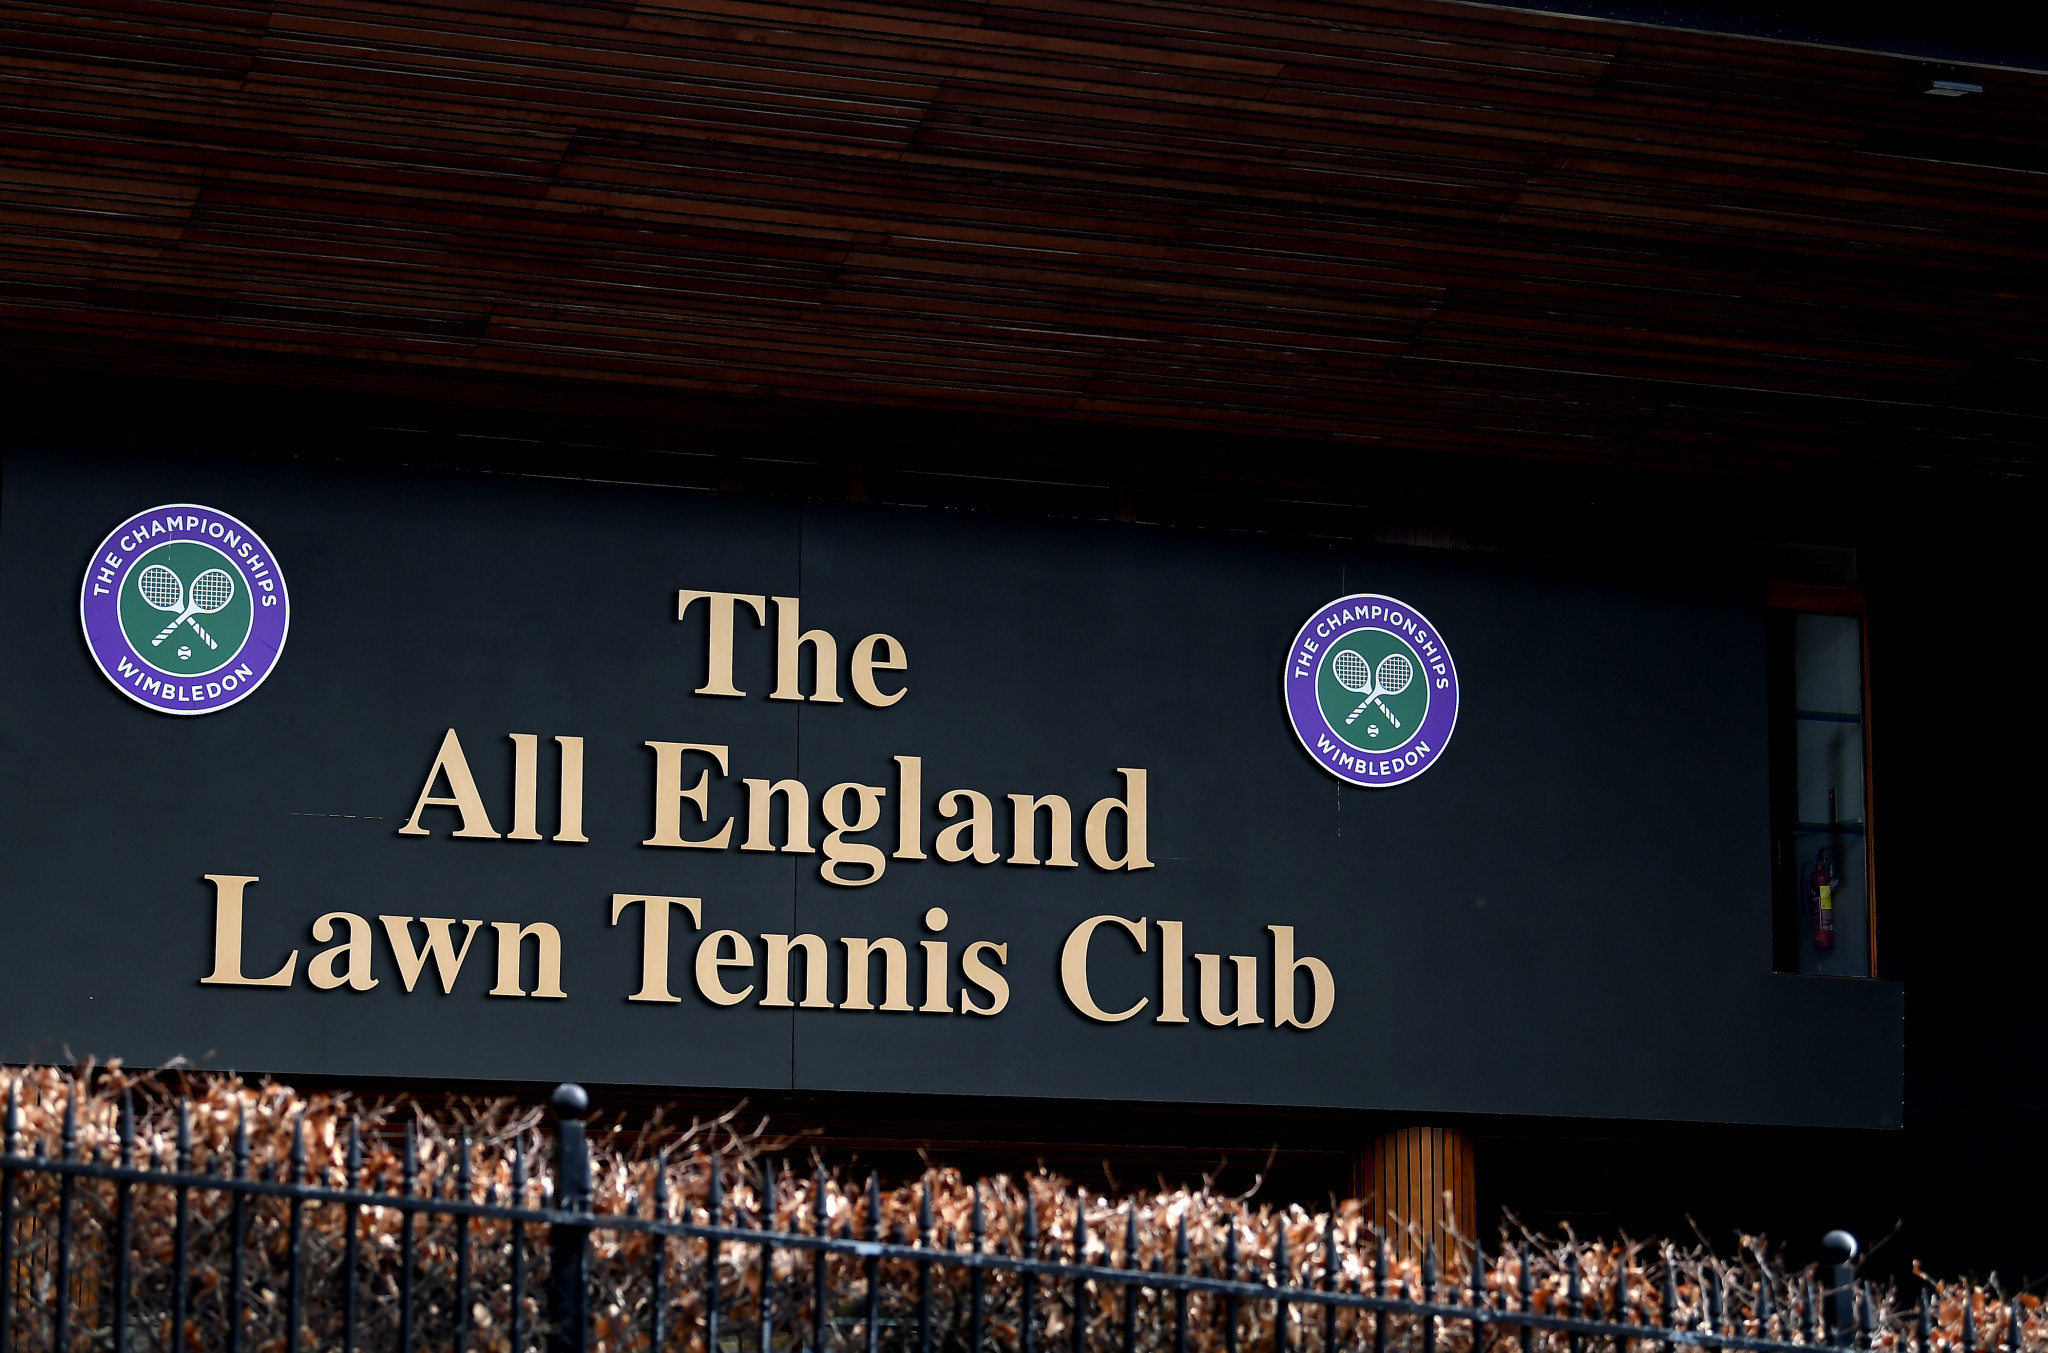 AELTC announced a series of contributions to support the national and international recovery from the coronavirus pandemic ©Getty Images